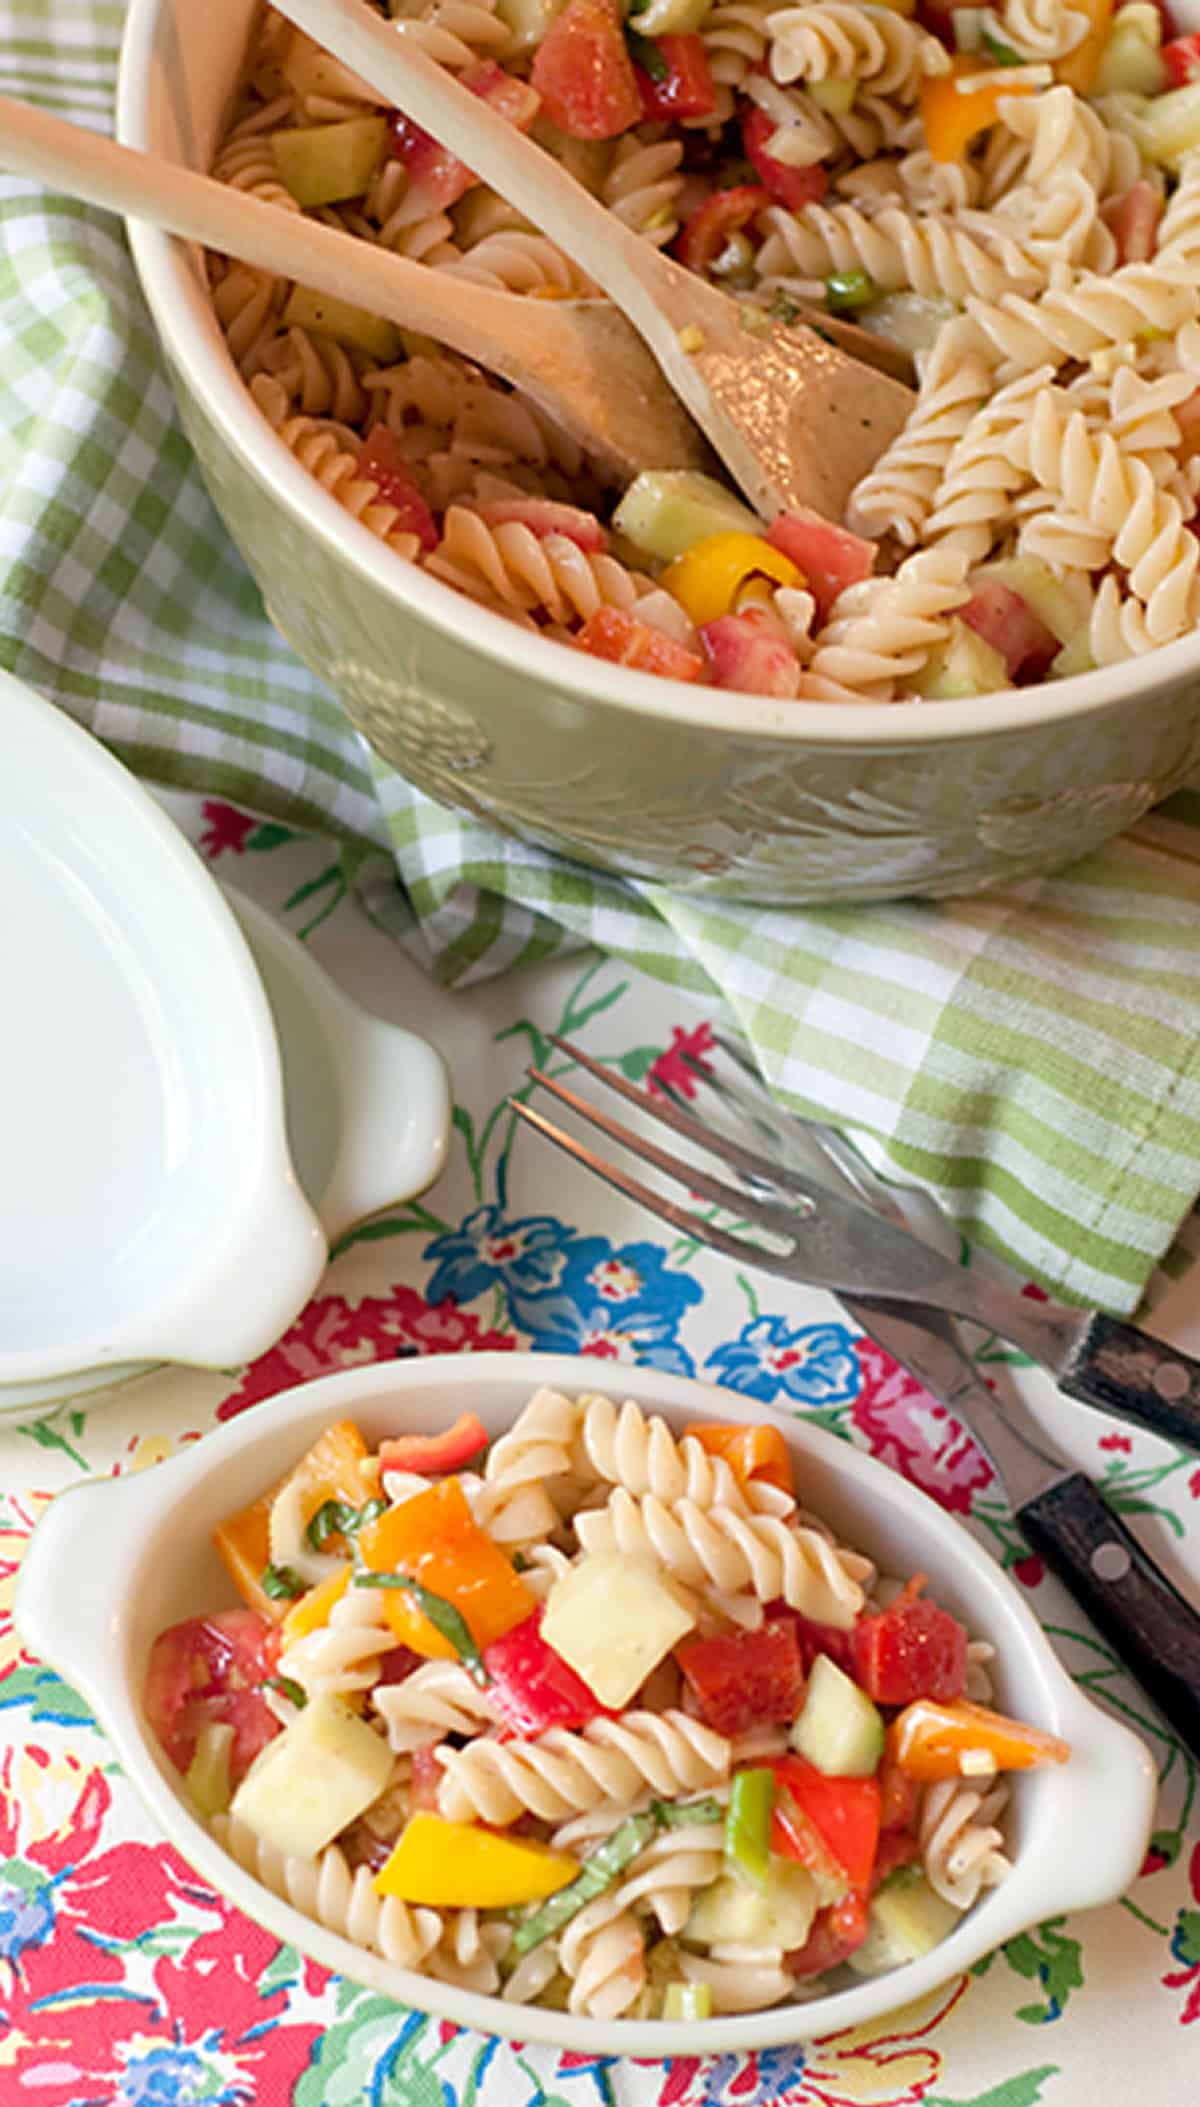 Finished pasta salad in a serving bowl.